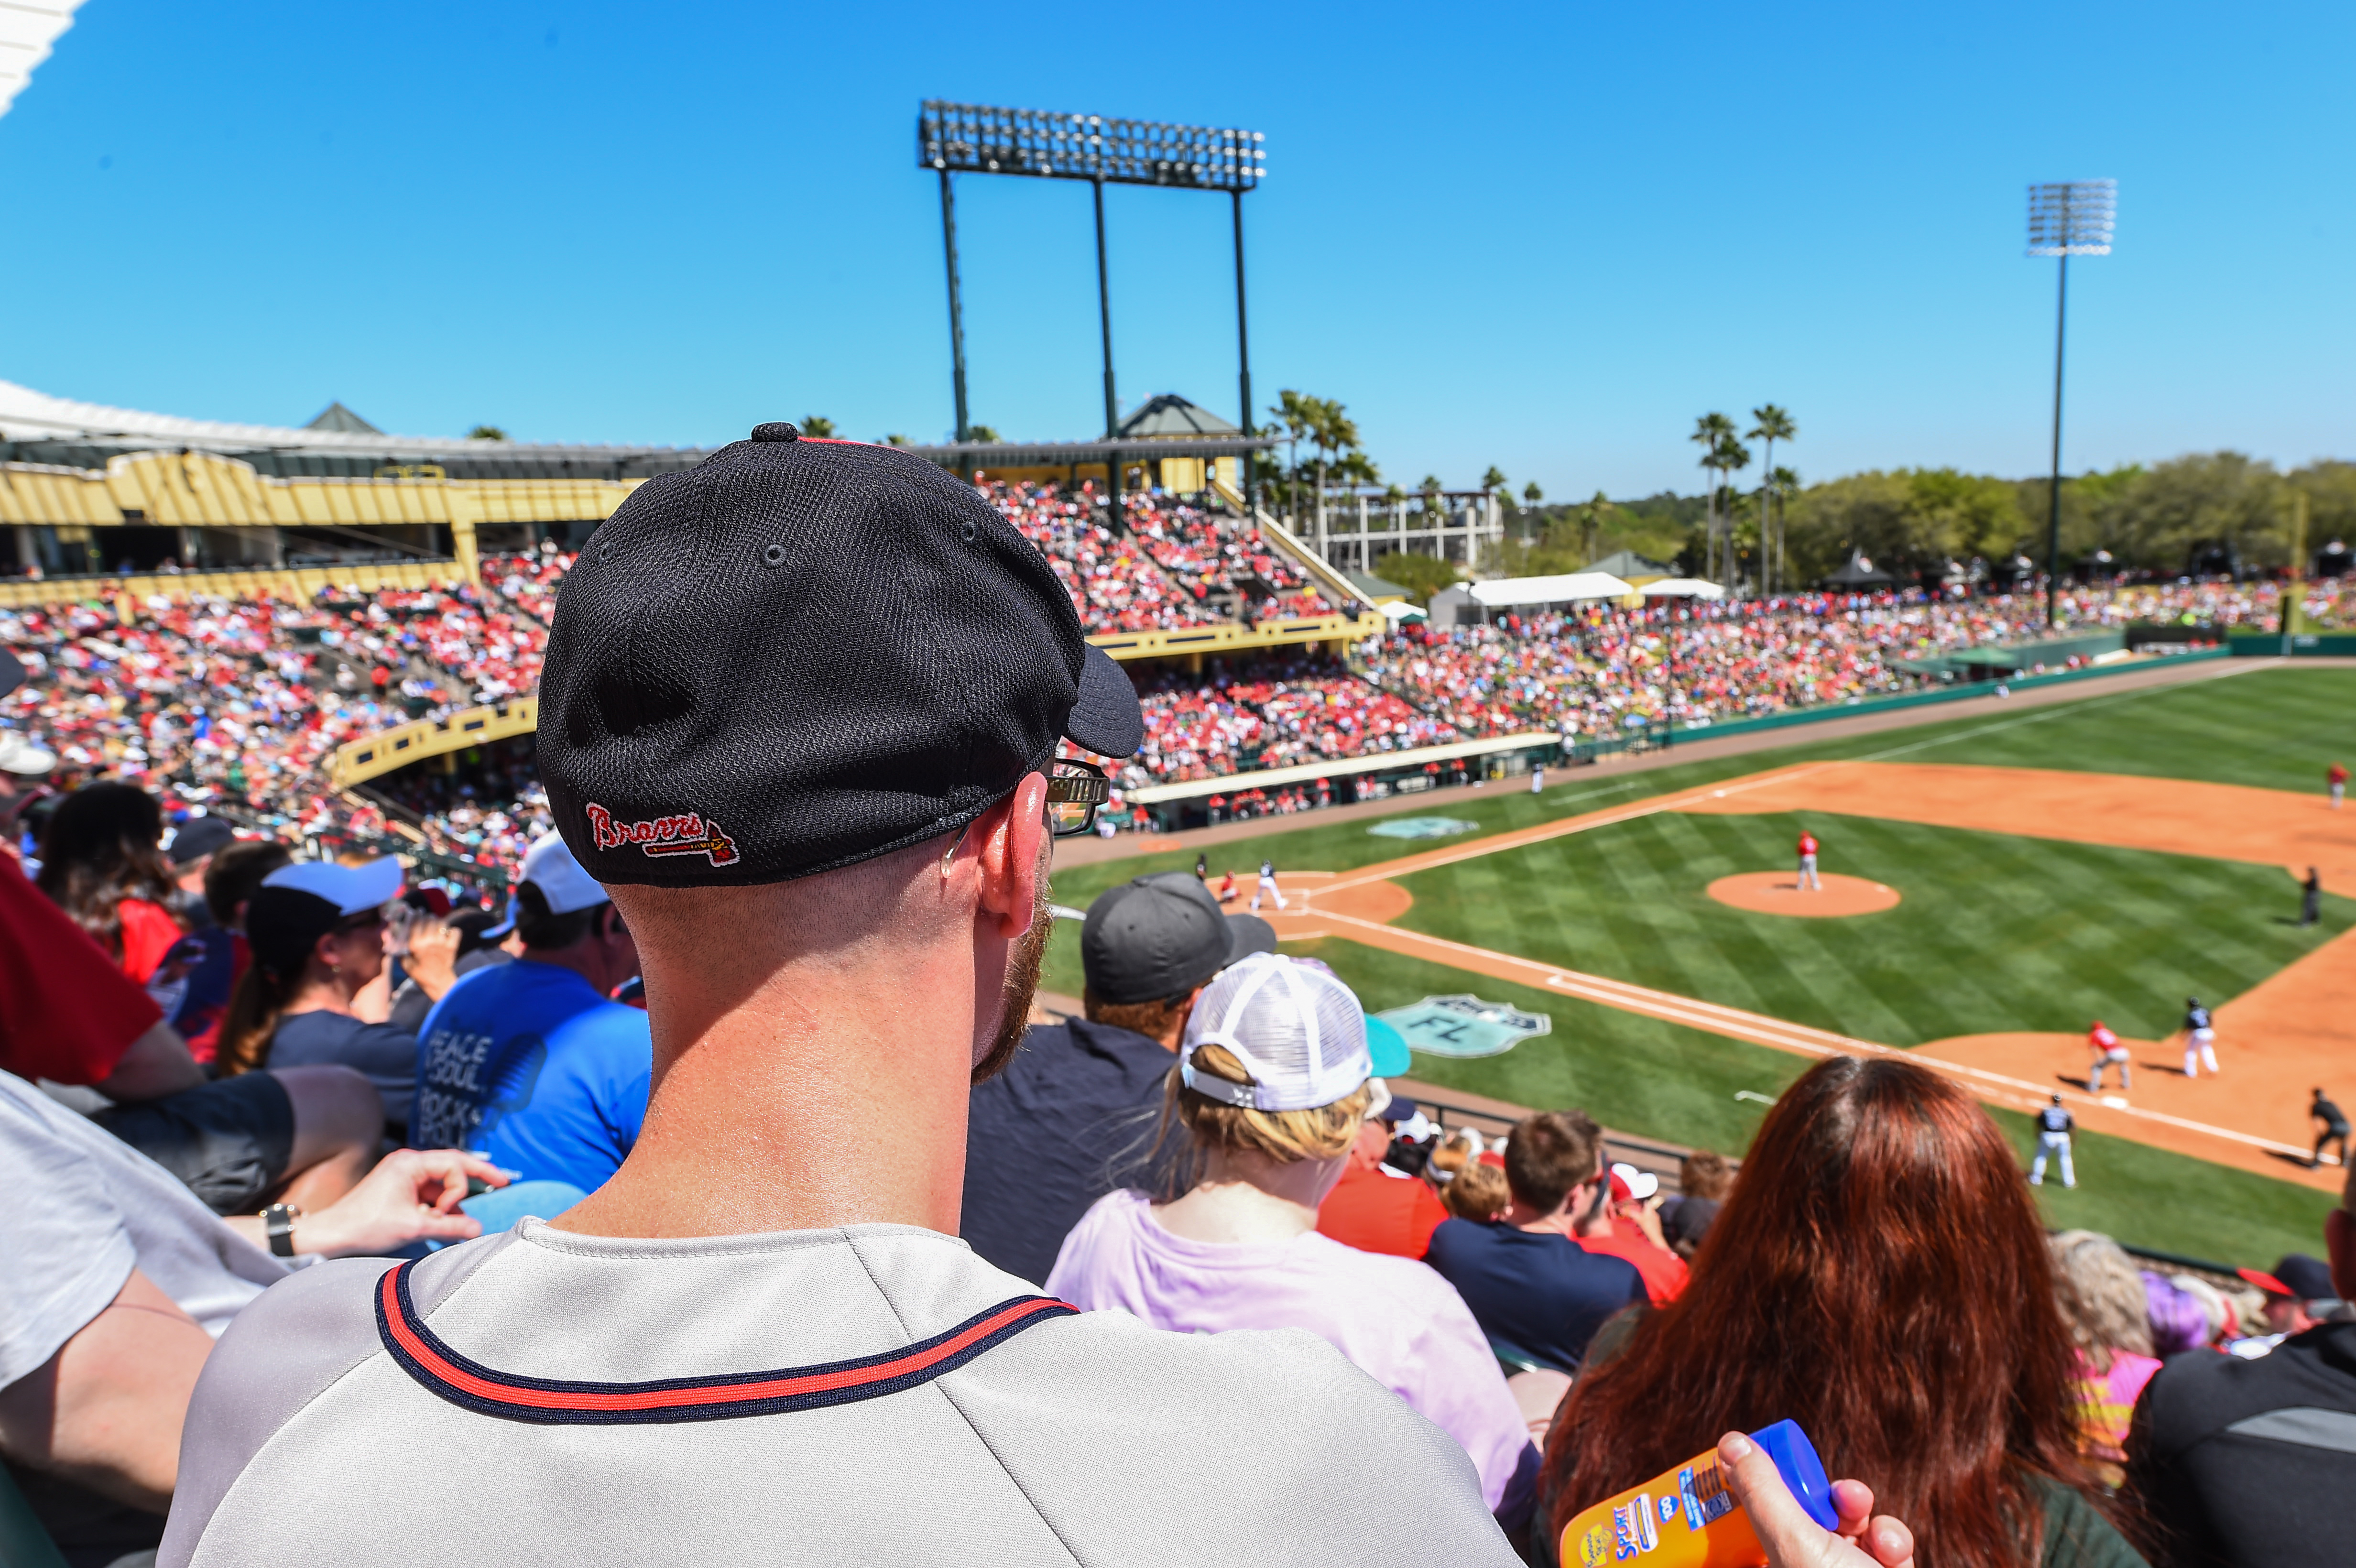 braves 2019 spring training home schedule features games against